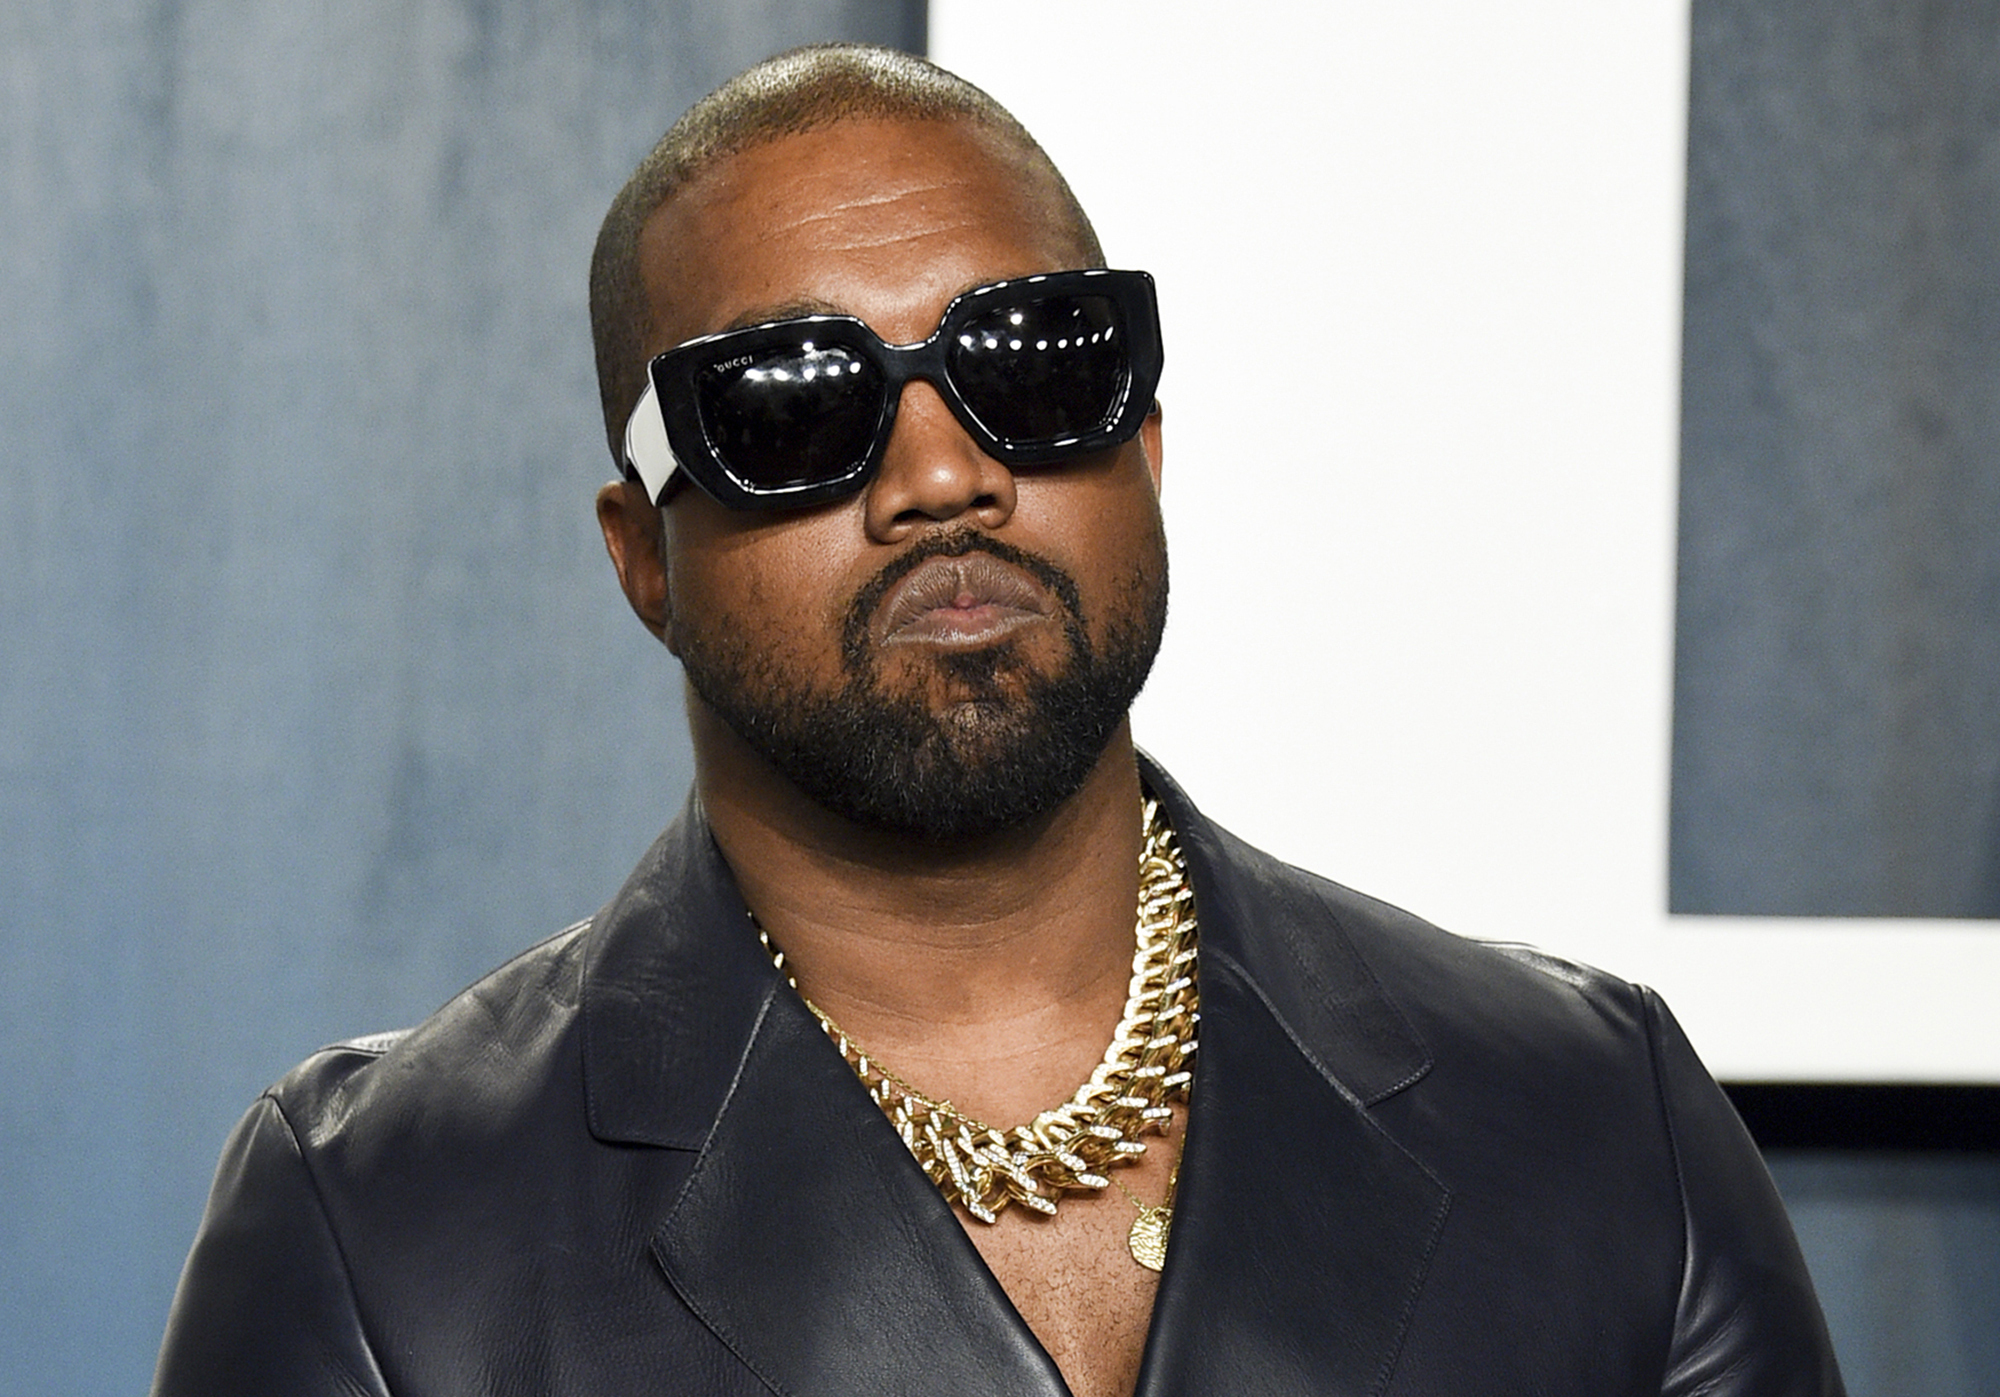 Kanye West quote: I completely lost everything, but I gained everything  because I